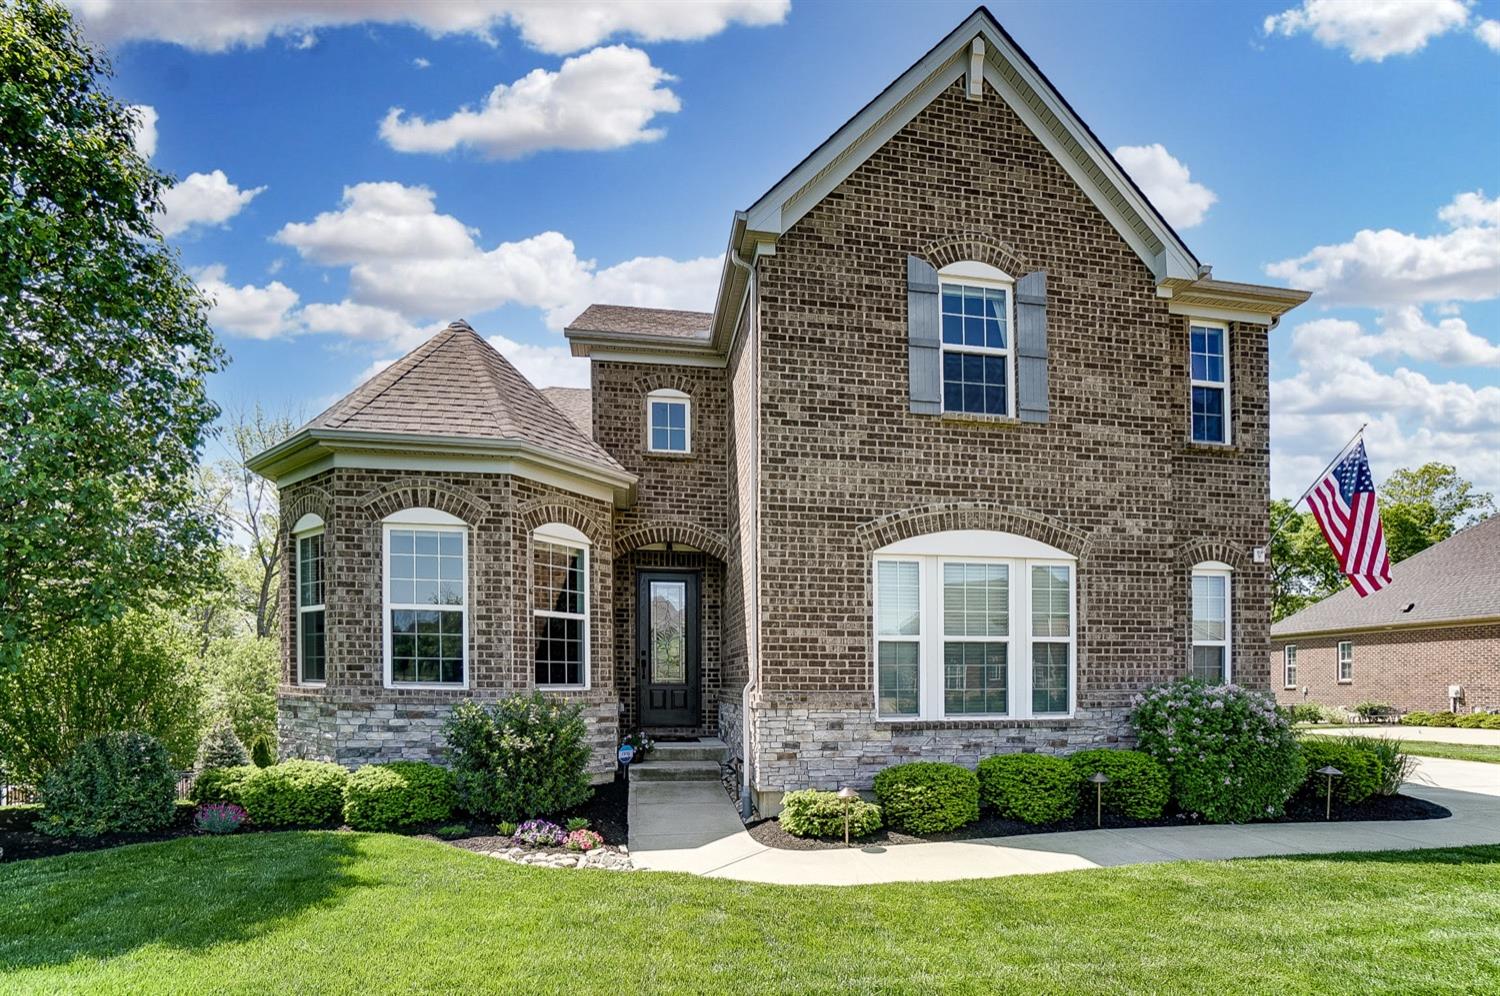 8932 Oakcrest Way West Chester - East, OH